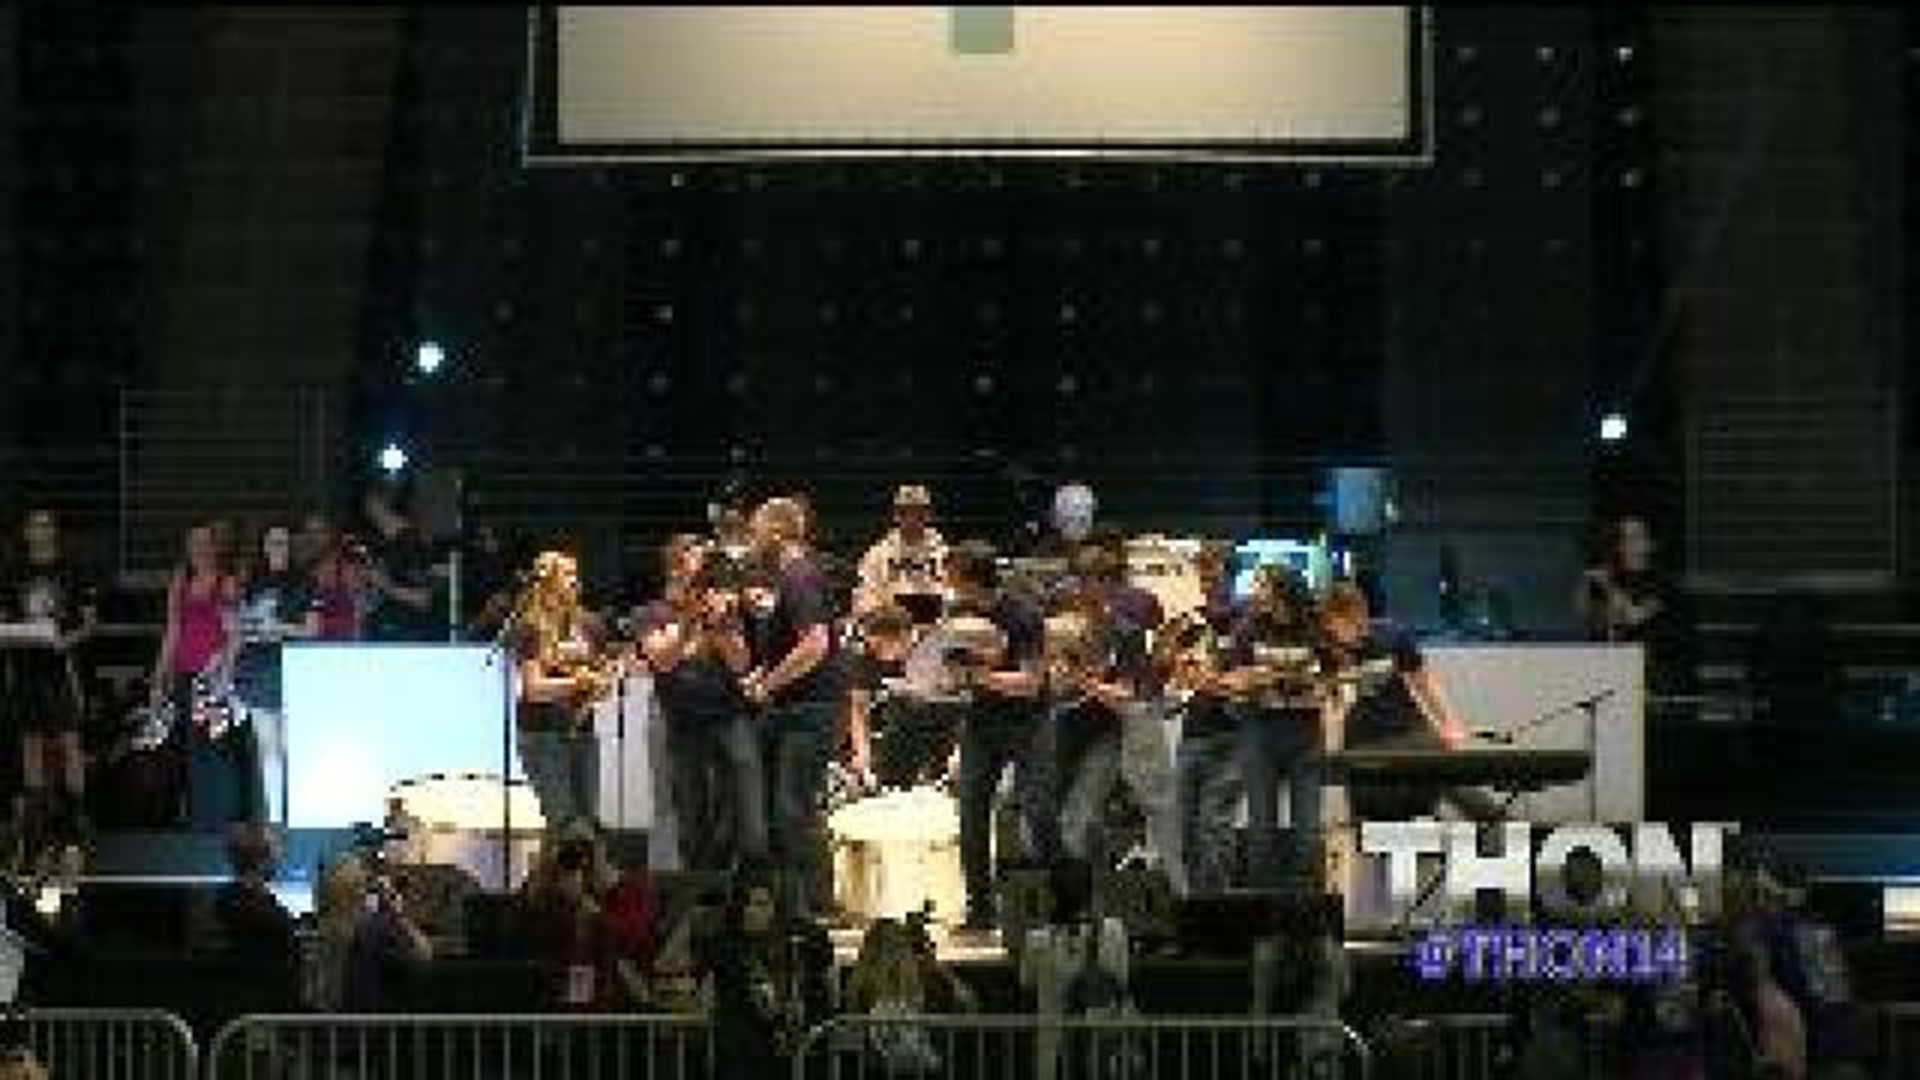 THON is a special celebration for a family from Williamsport